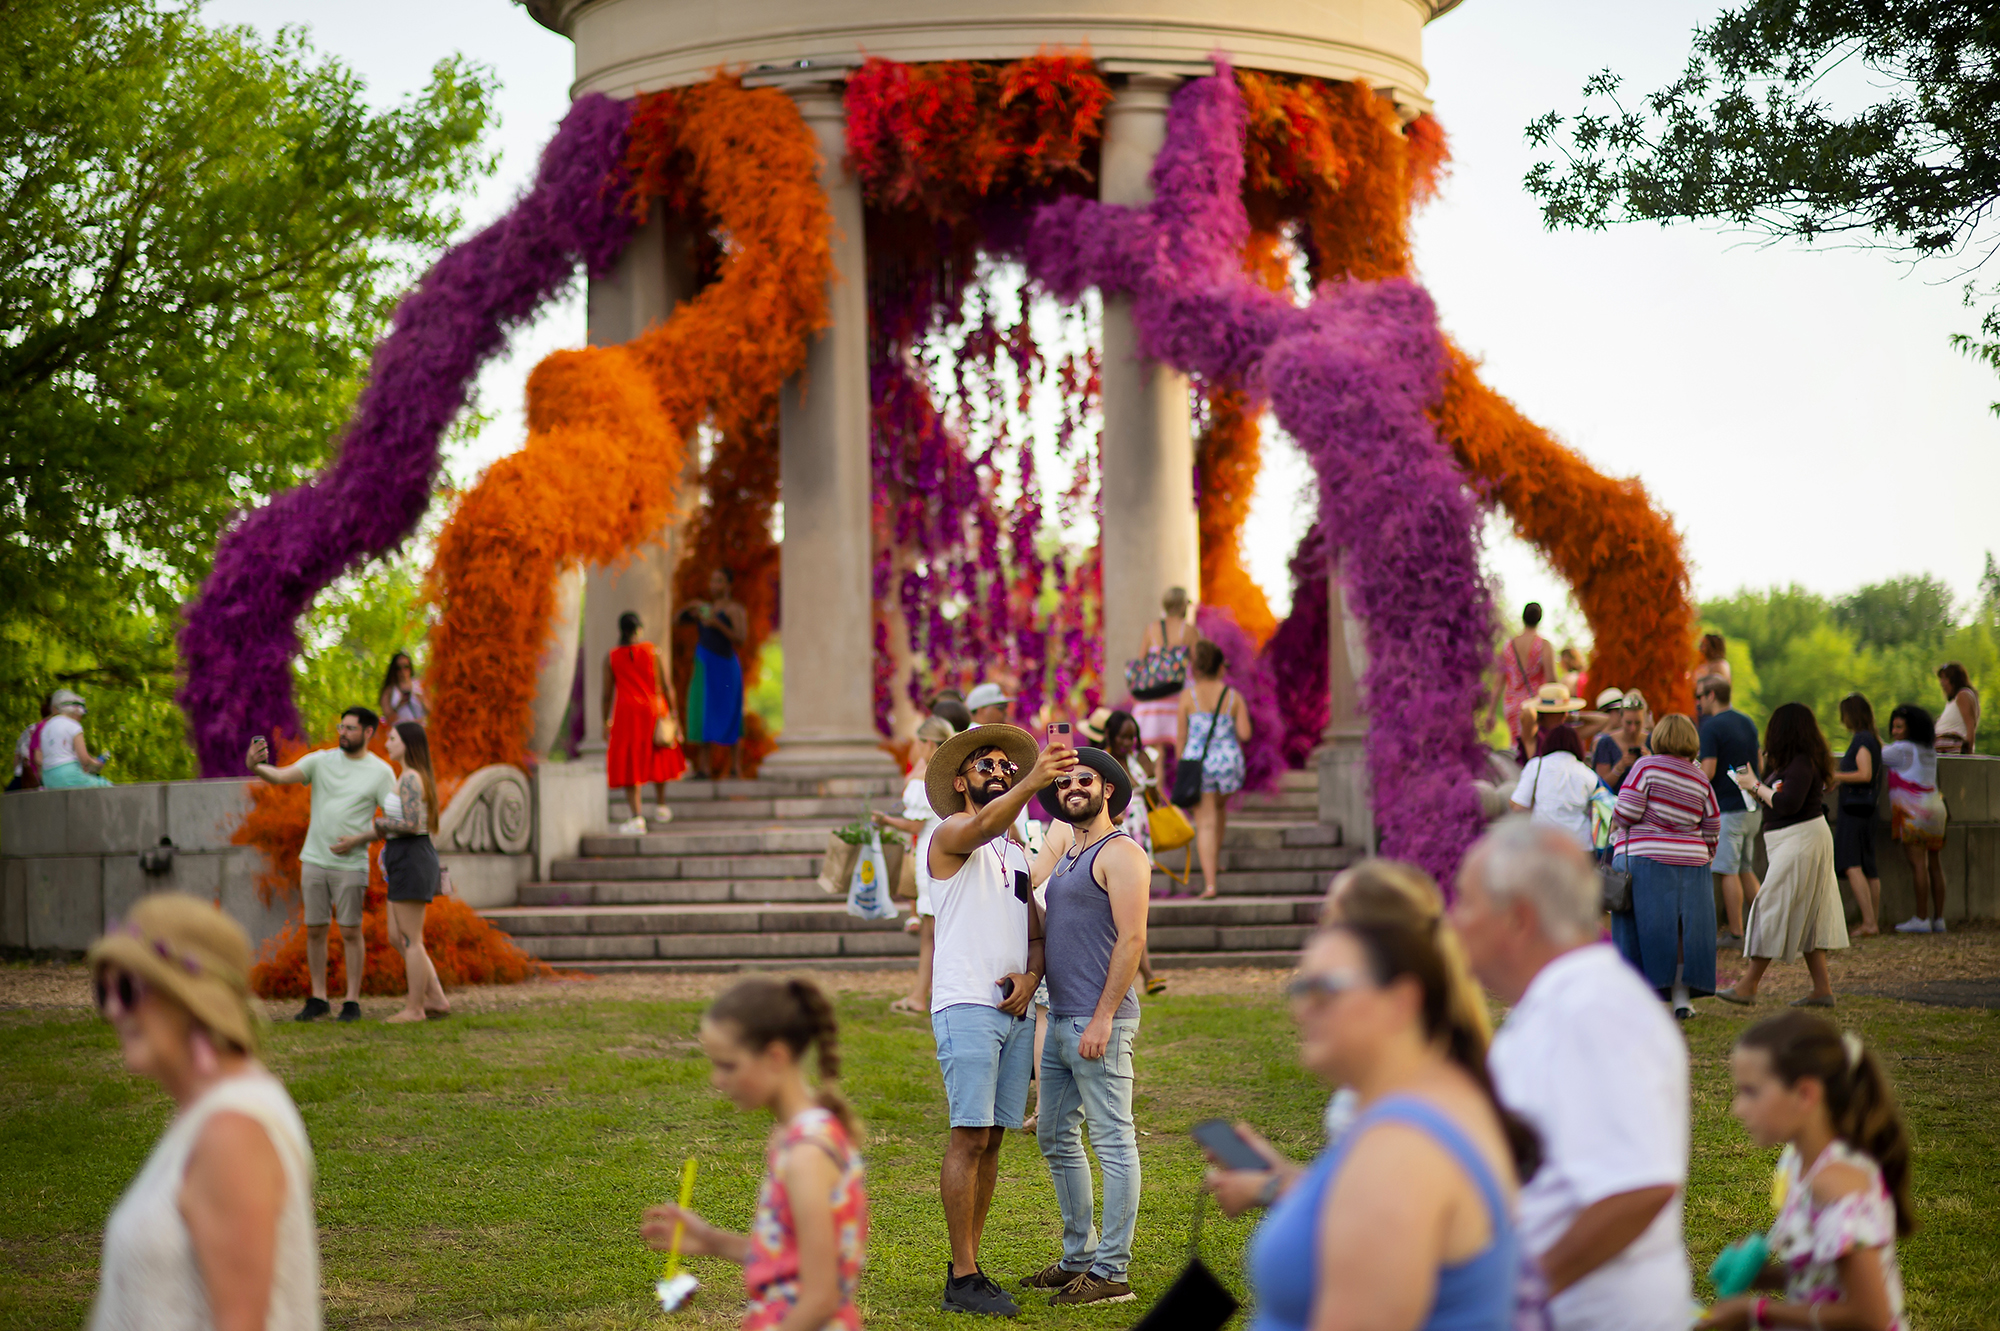 A gazebo with large strings of flowers jutting out, as onlookers take photos.